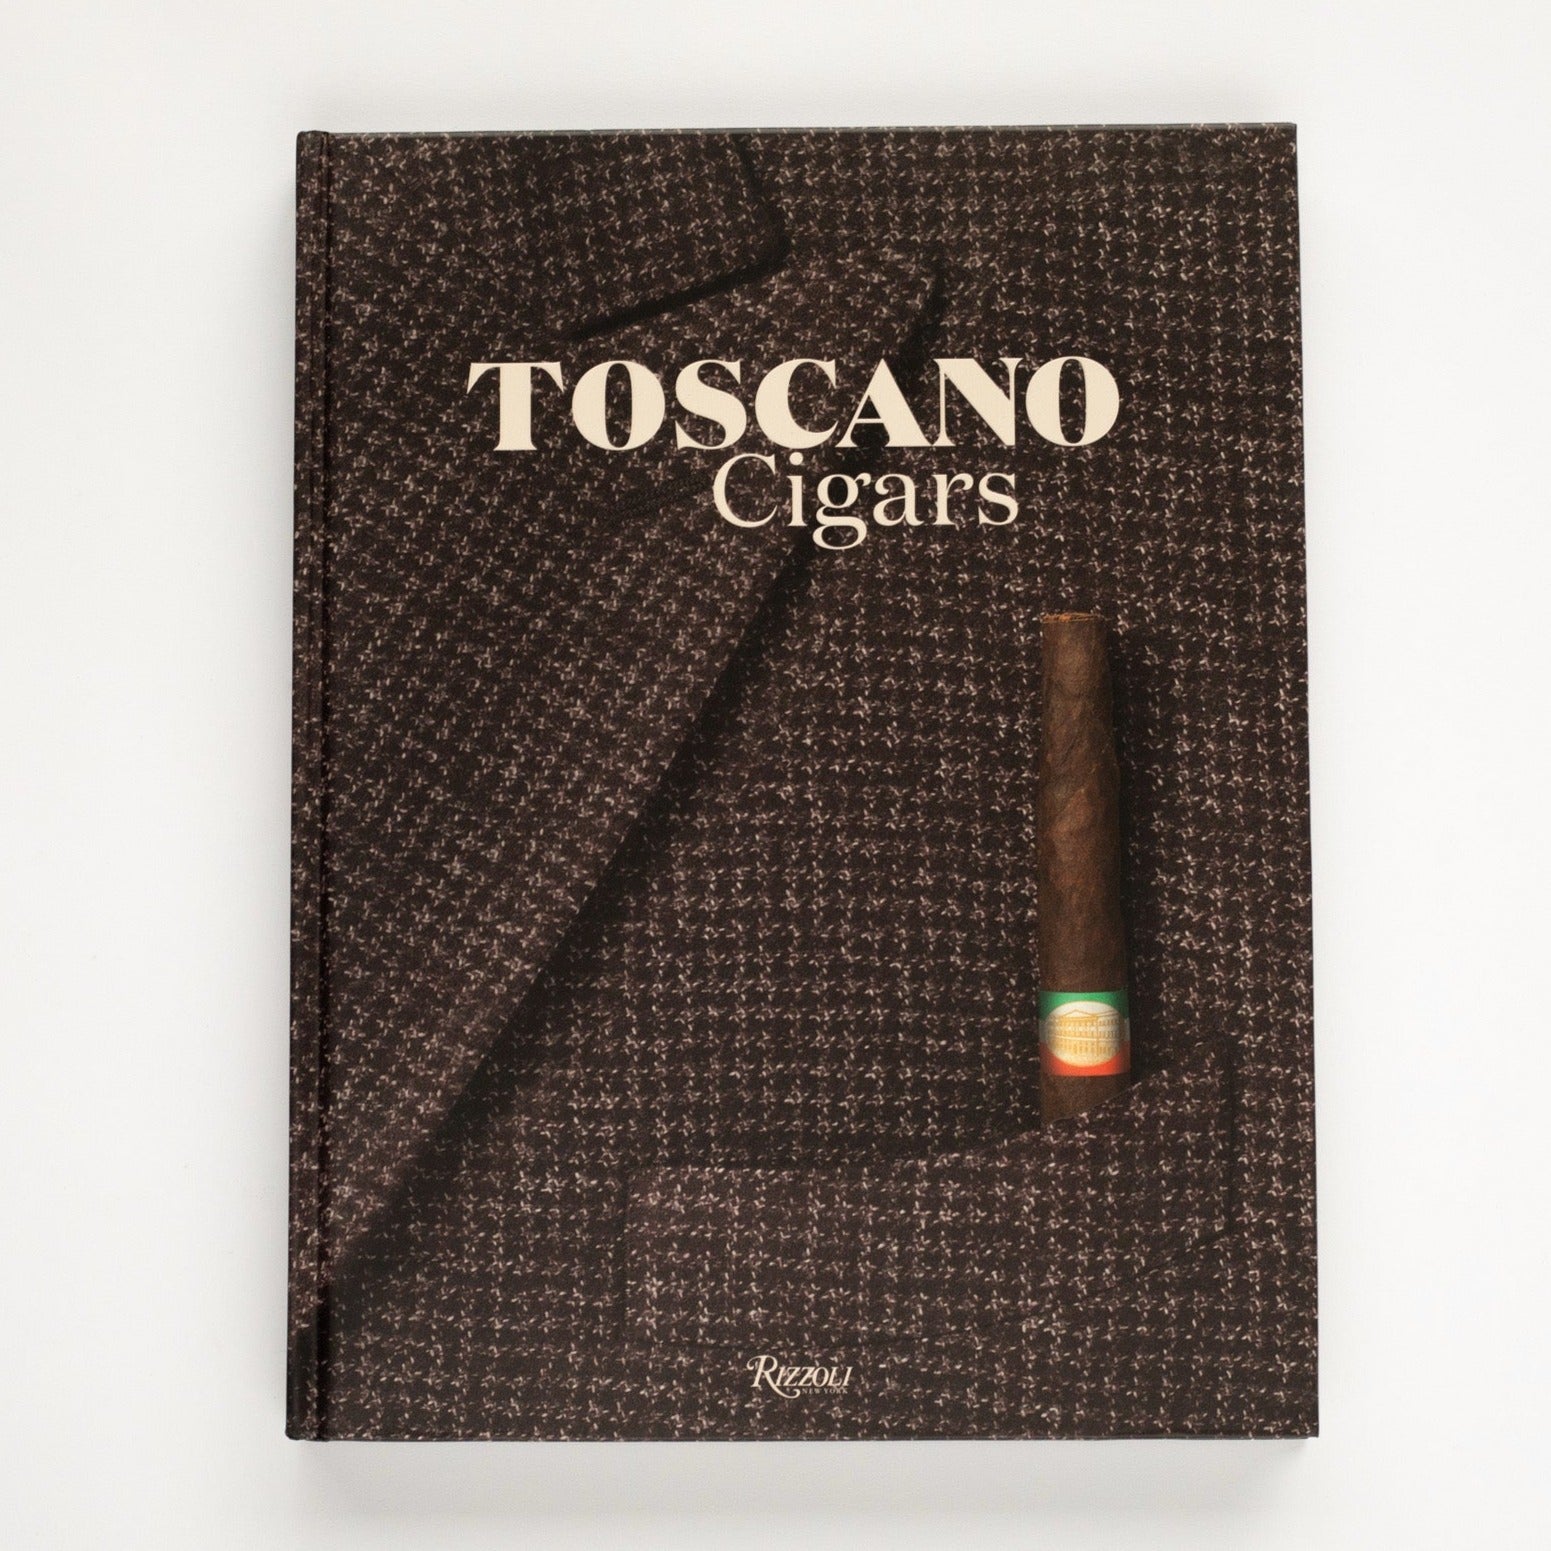 The front cover of "Toscano Cigars" photographed on a white background. The cover is a close up of a men's brown tweed suite jacket with a brown cigar sticking out of the chest pocket.